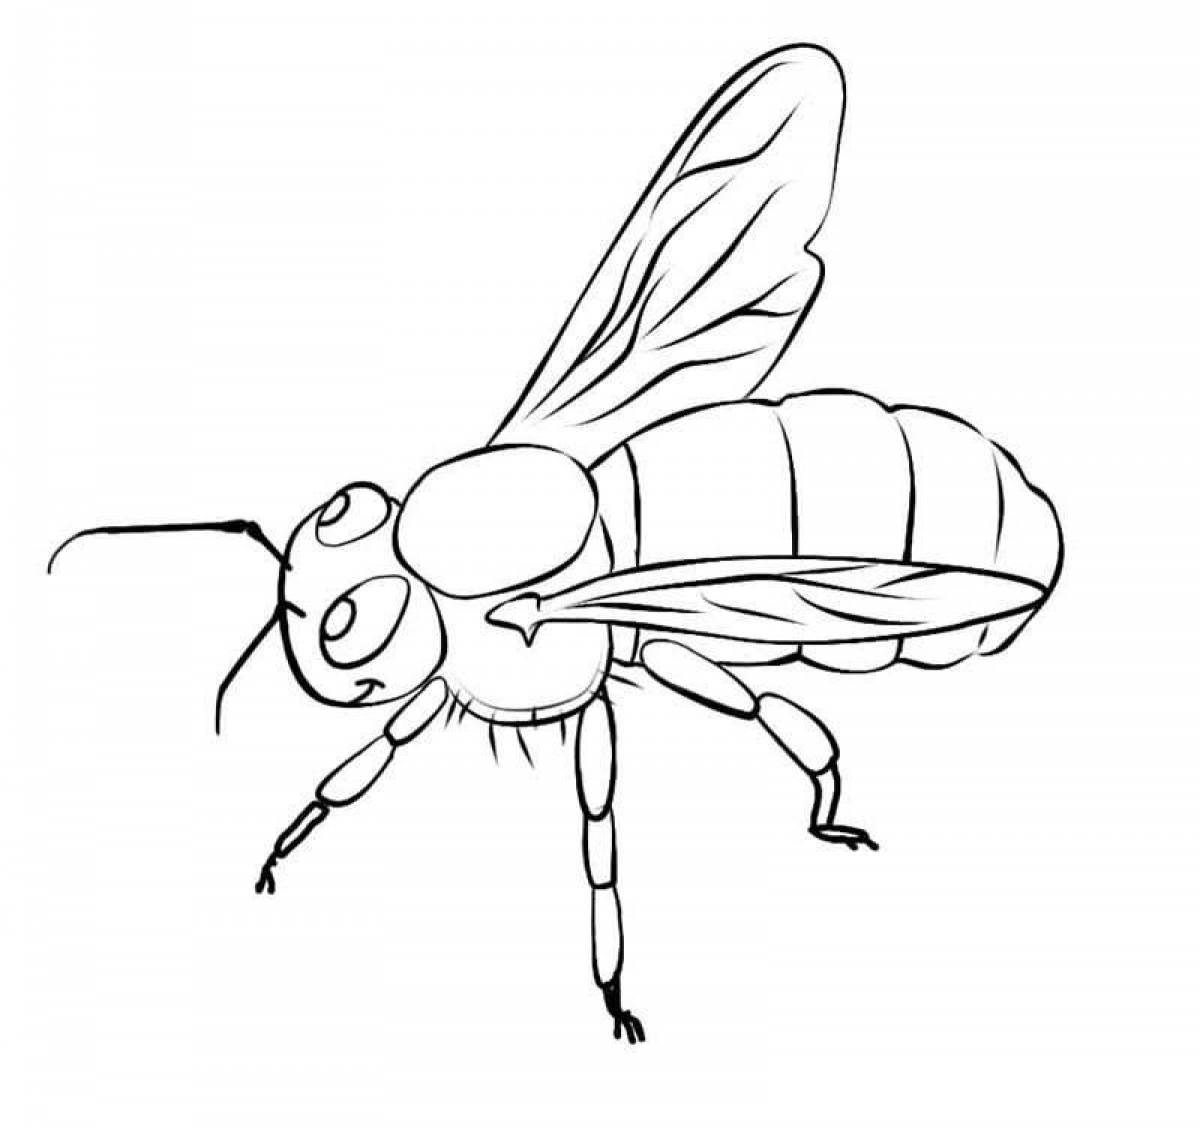 Friendly bee coloring page